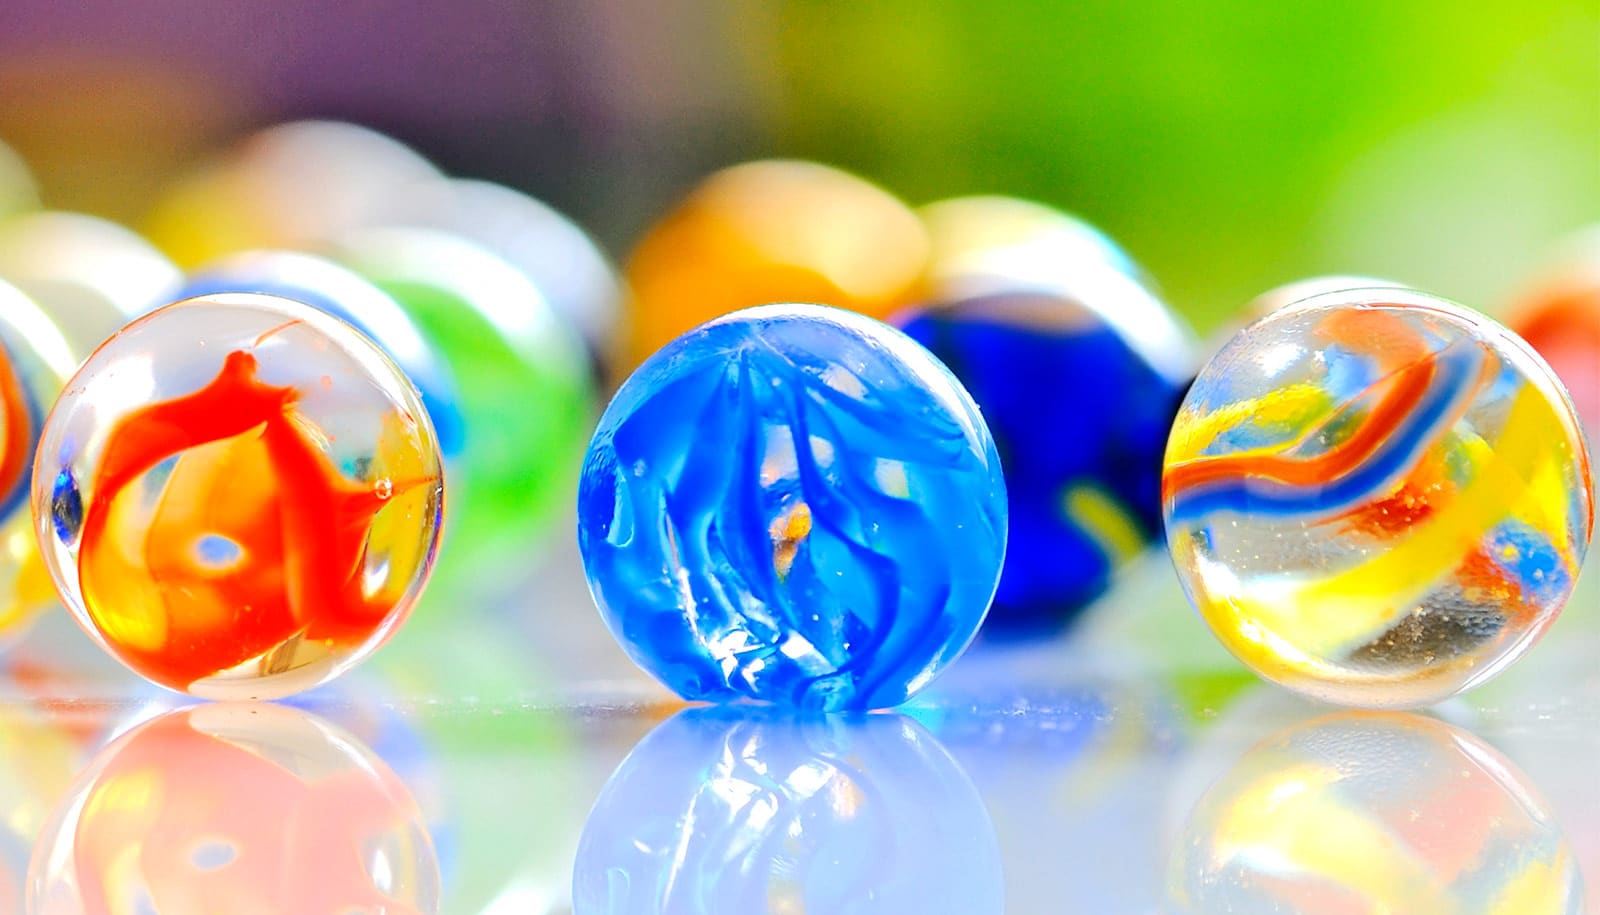 Three glass marbles among a group of marbles sitting on a reflective surface.